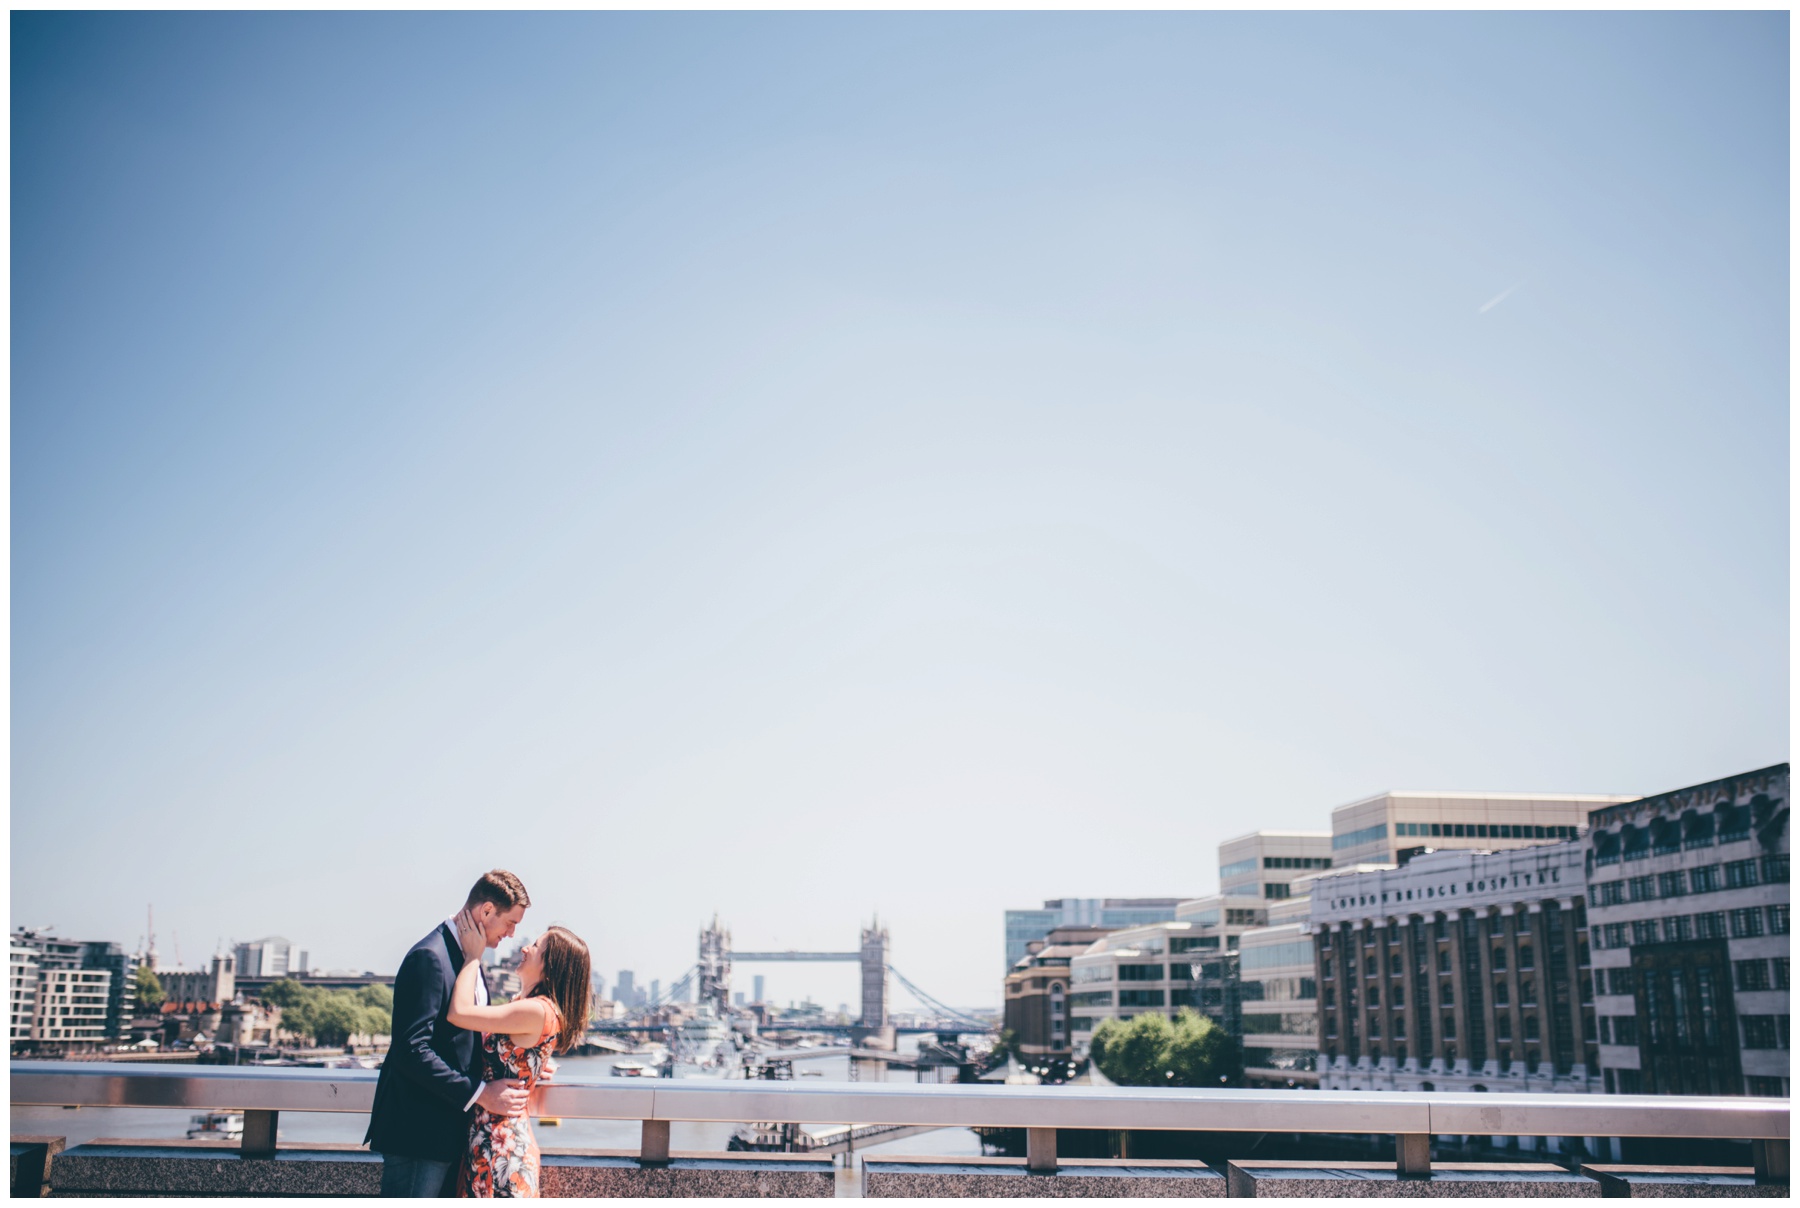 A pre-wedding photoshoot in London City Centre.